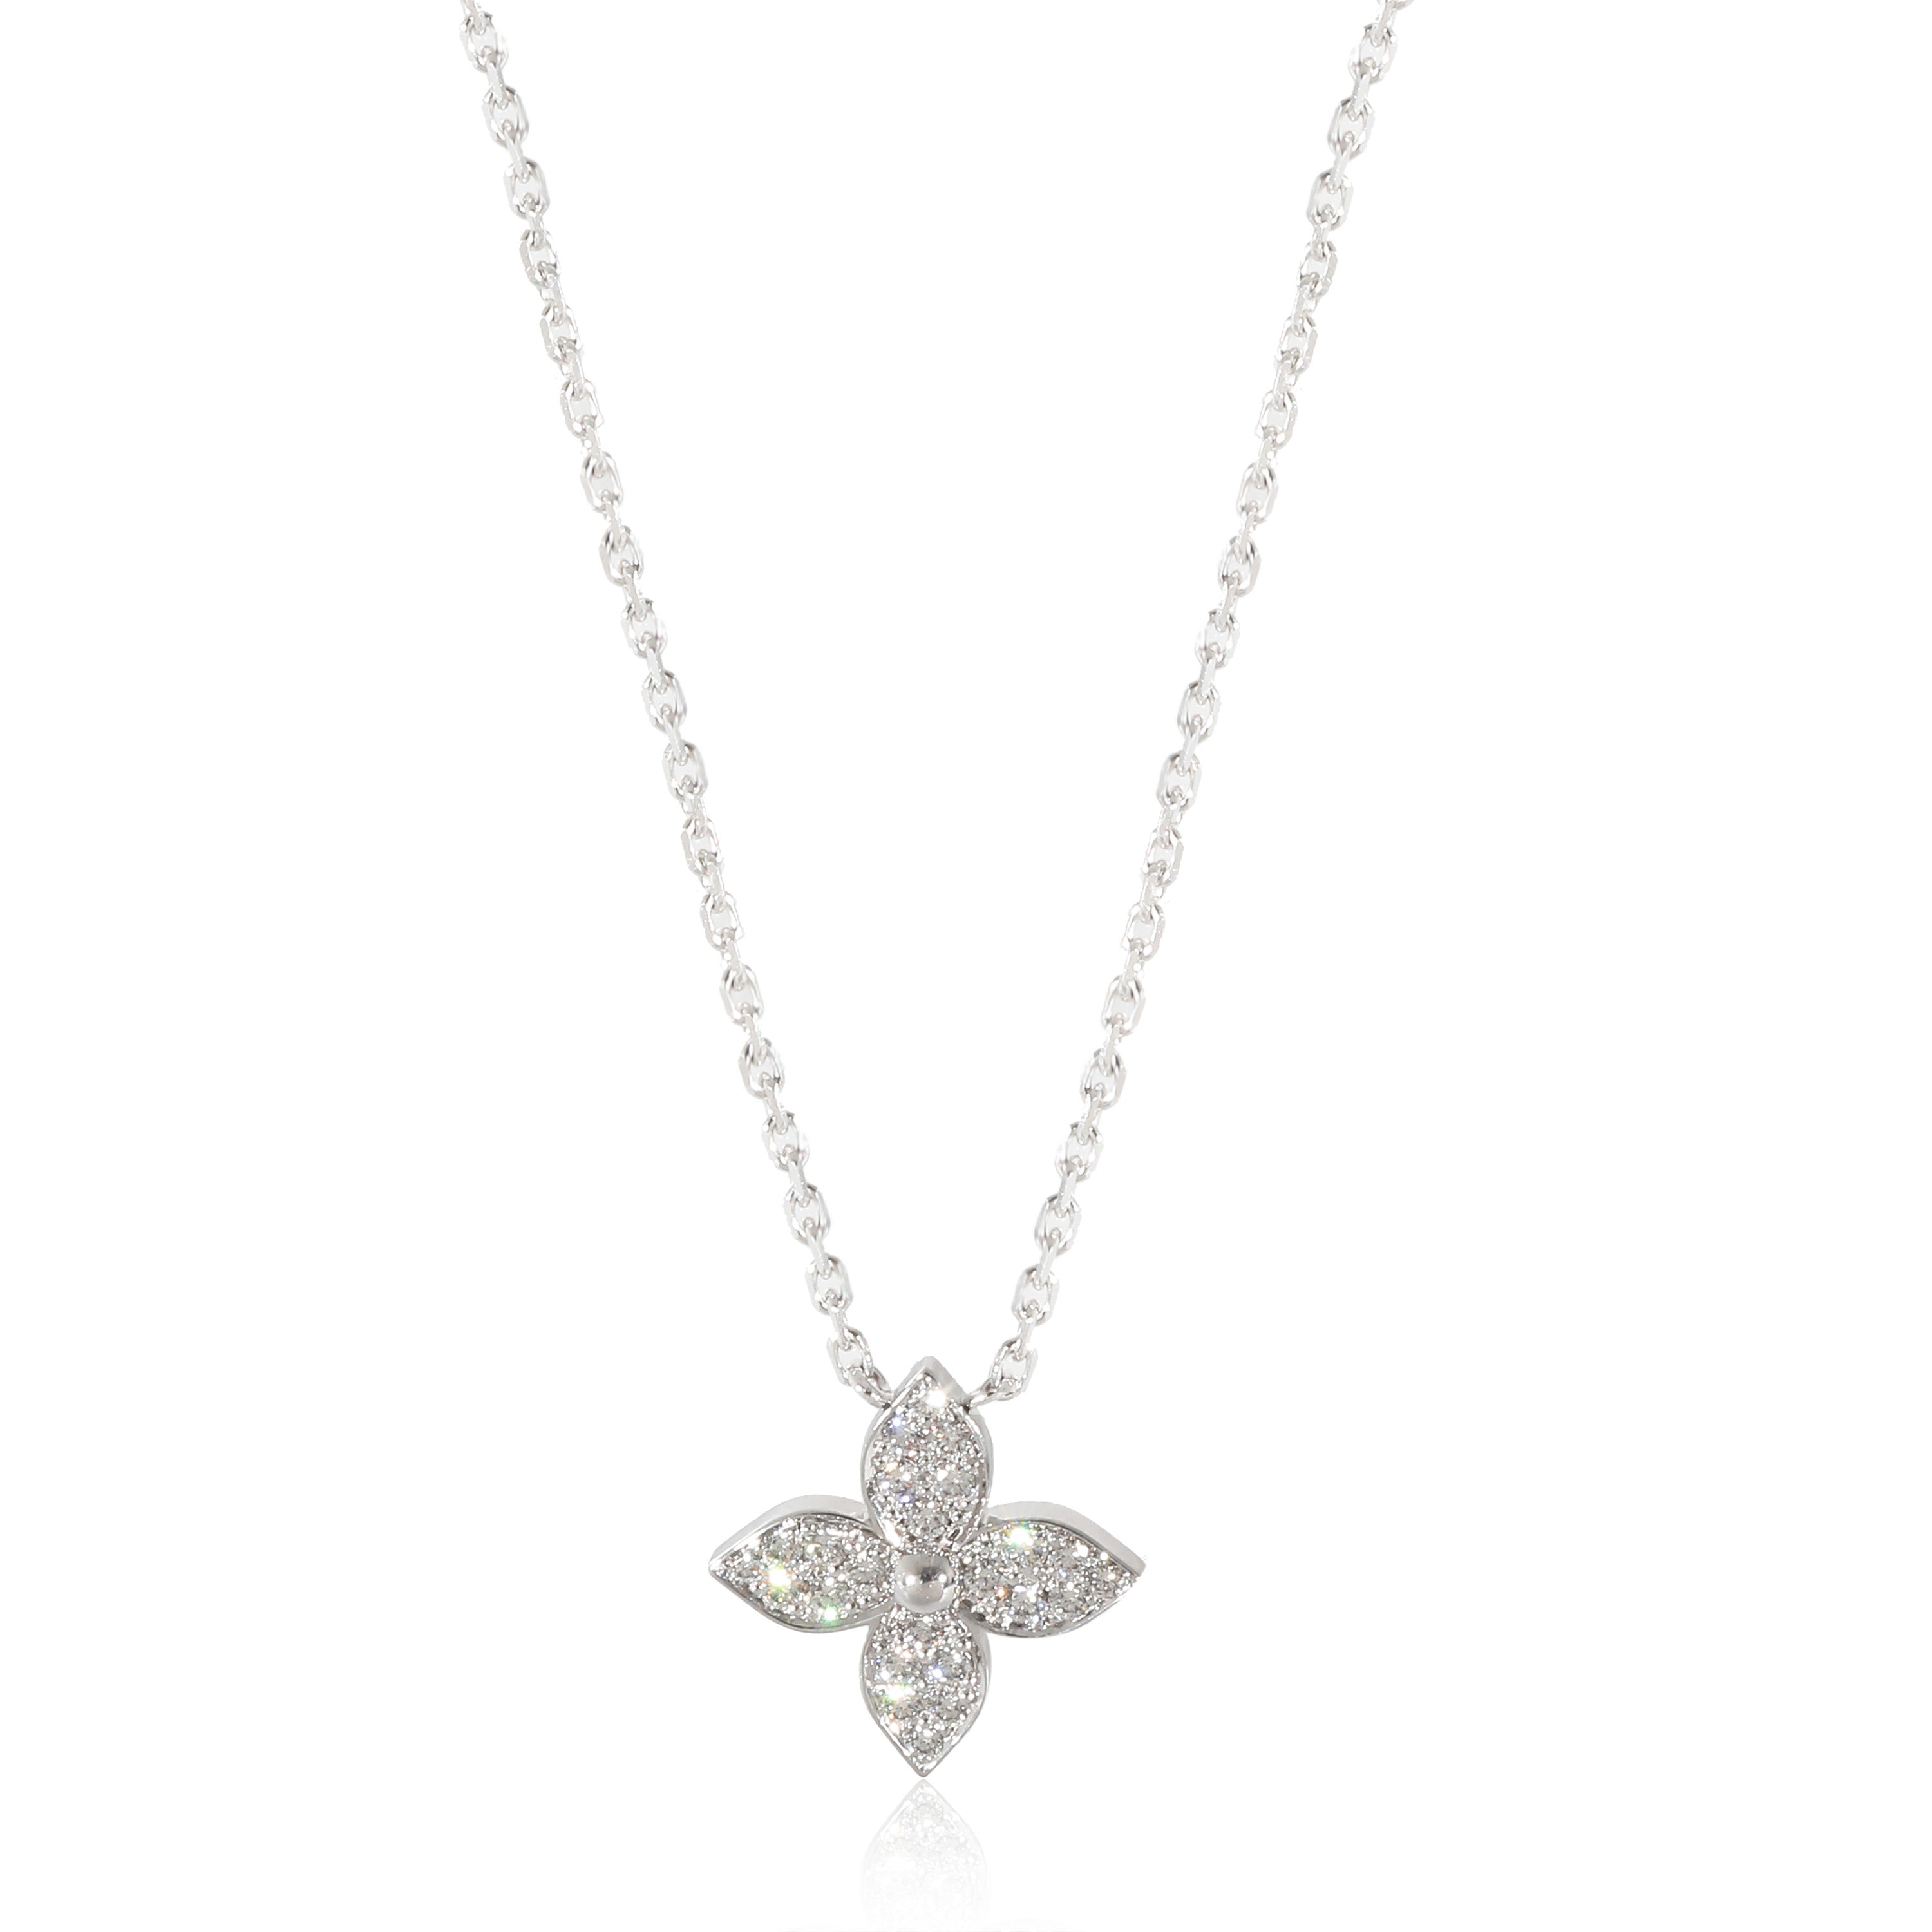 Idylle Blossom Pendant, Yellow Gold And Diamonds - Categories